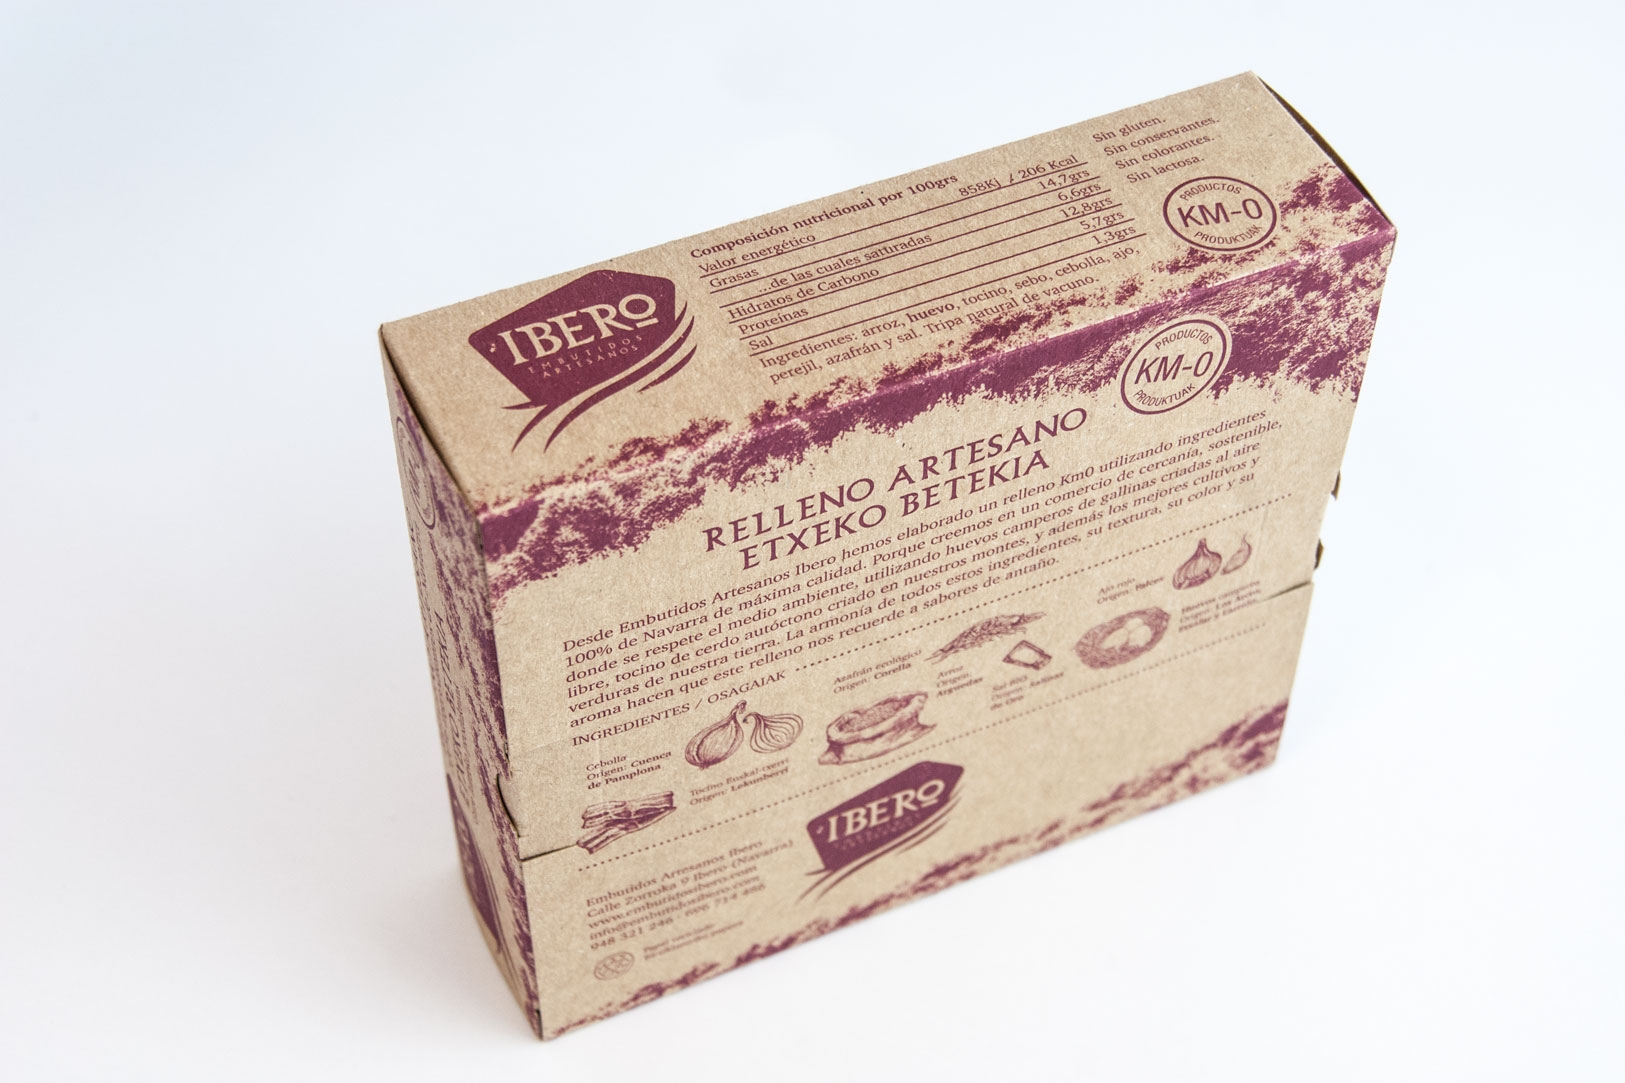 Packaging del producto. Parte trasera